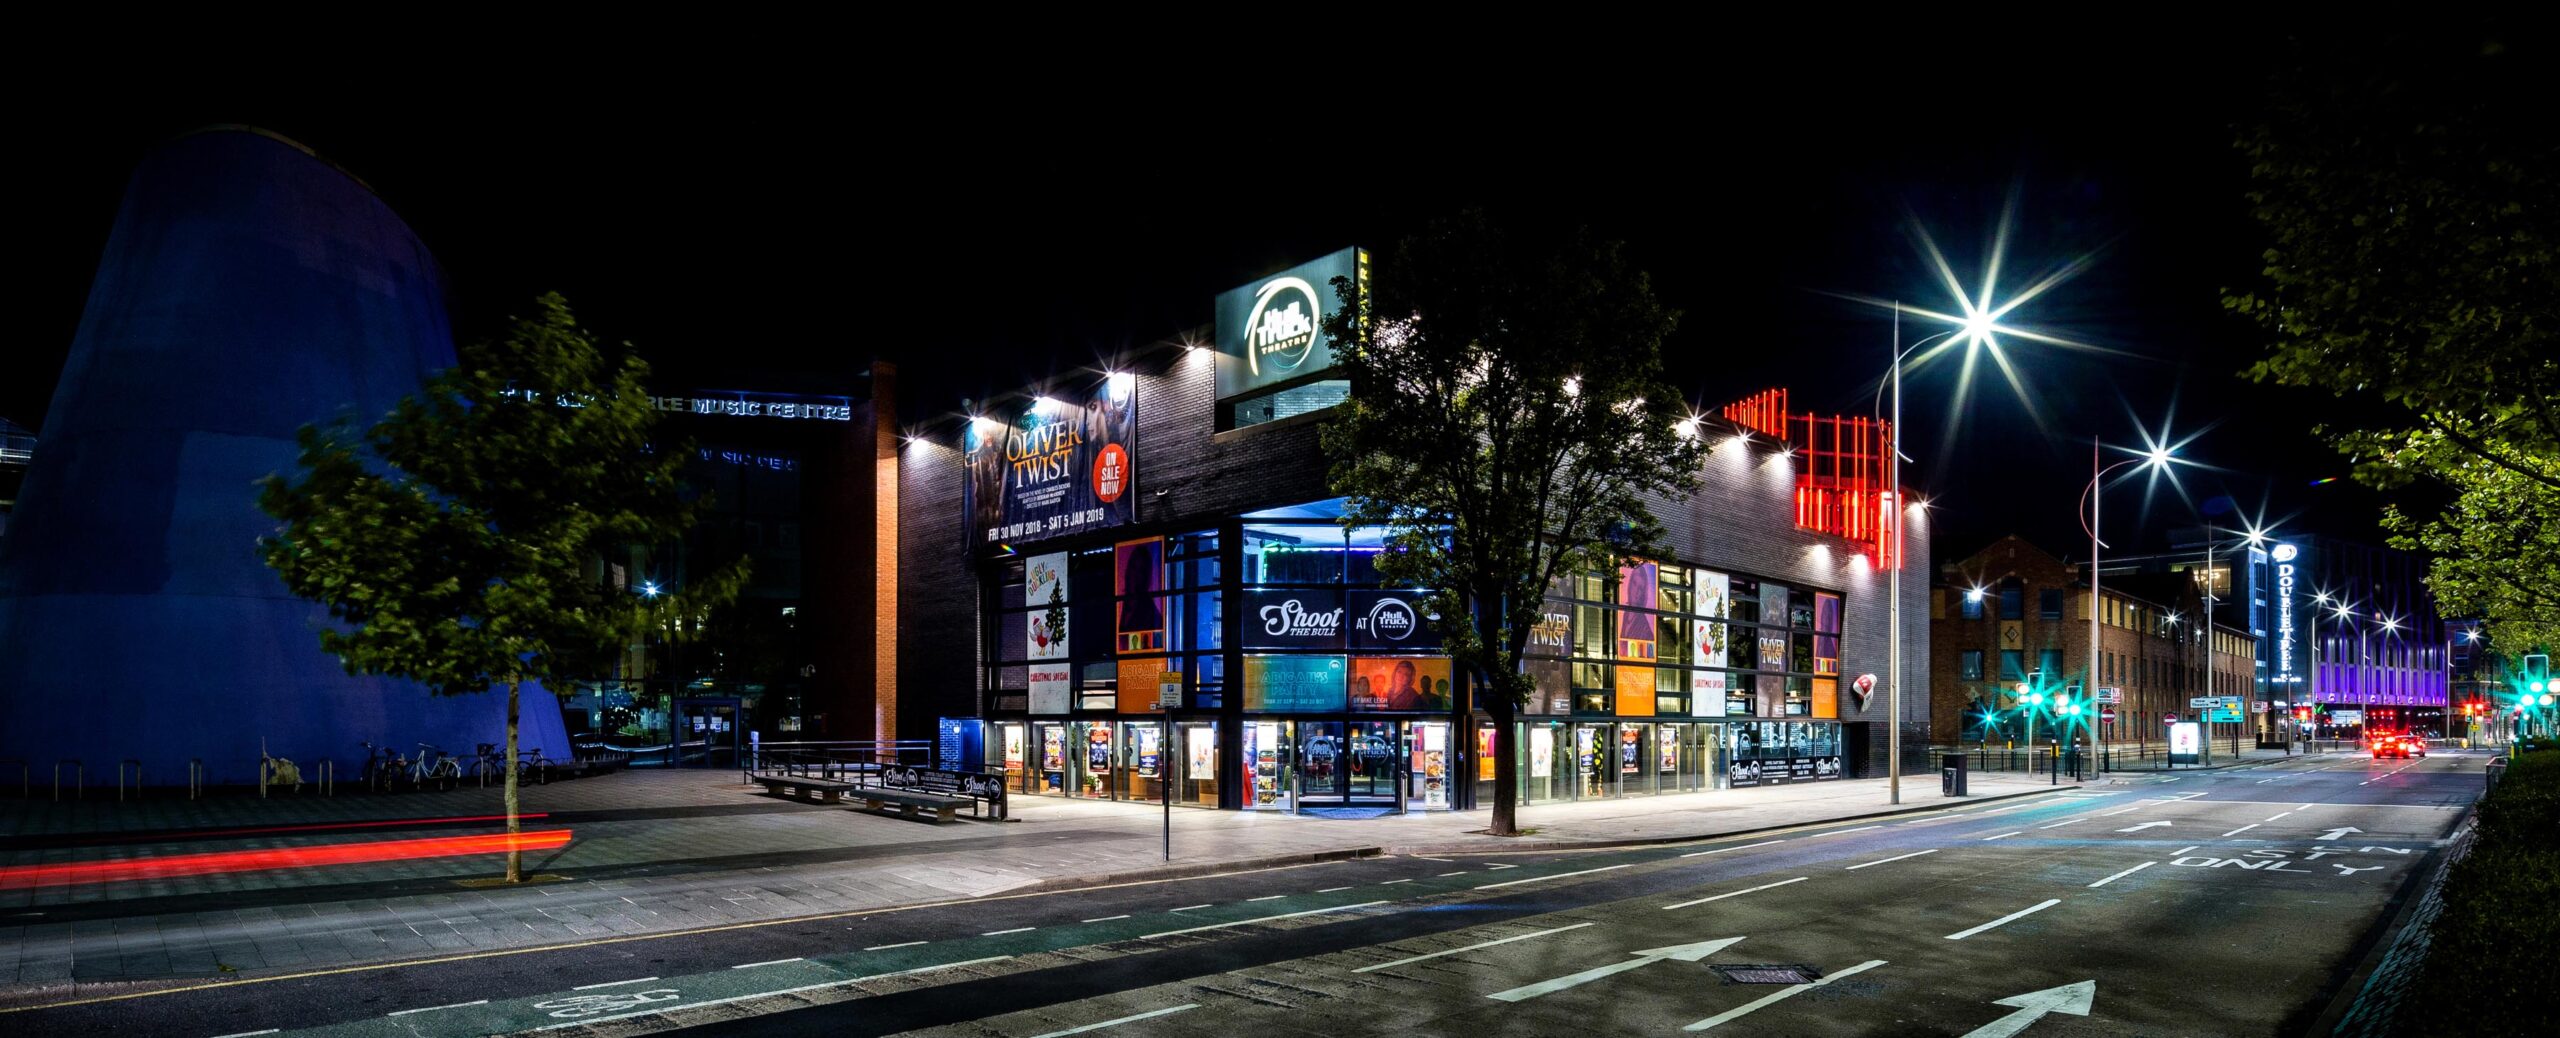 You are currently viewing LOOKING TO THE FUTURE – STATEMENT FROM HULL TRUCK THEATRE CEOS ANNOUNCING CLOSURE UNTIL 31 JULY AND PLANS FOR THE FUTURE